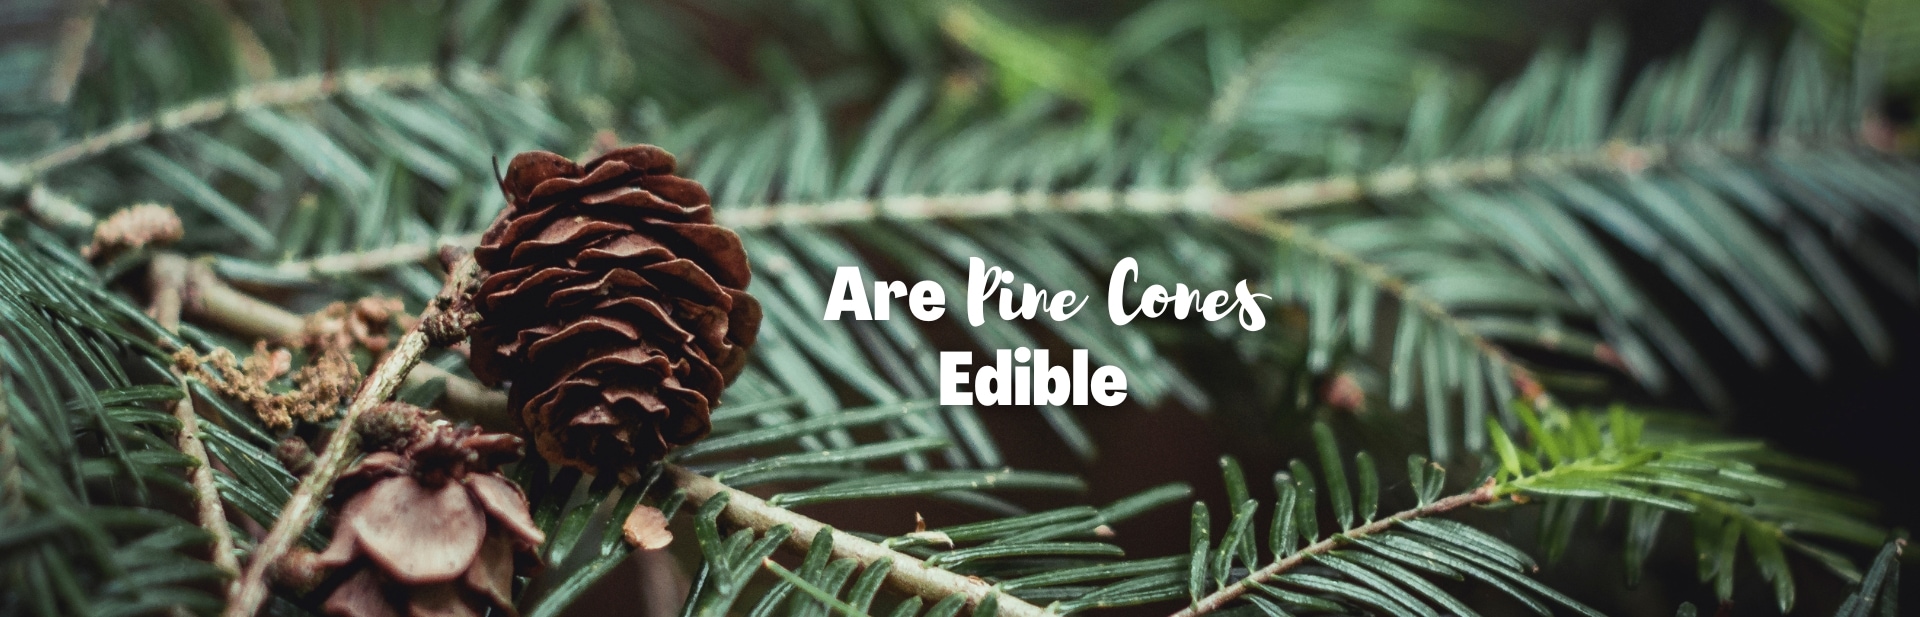 Are Pine Cones Edible? Pine Trees as Nature’s Larder